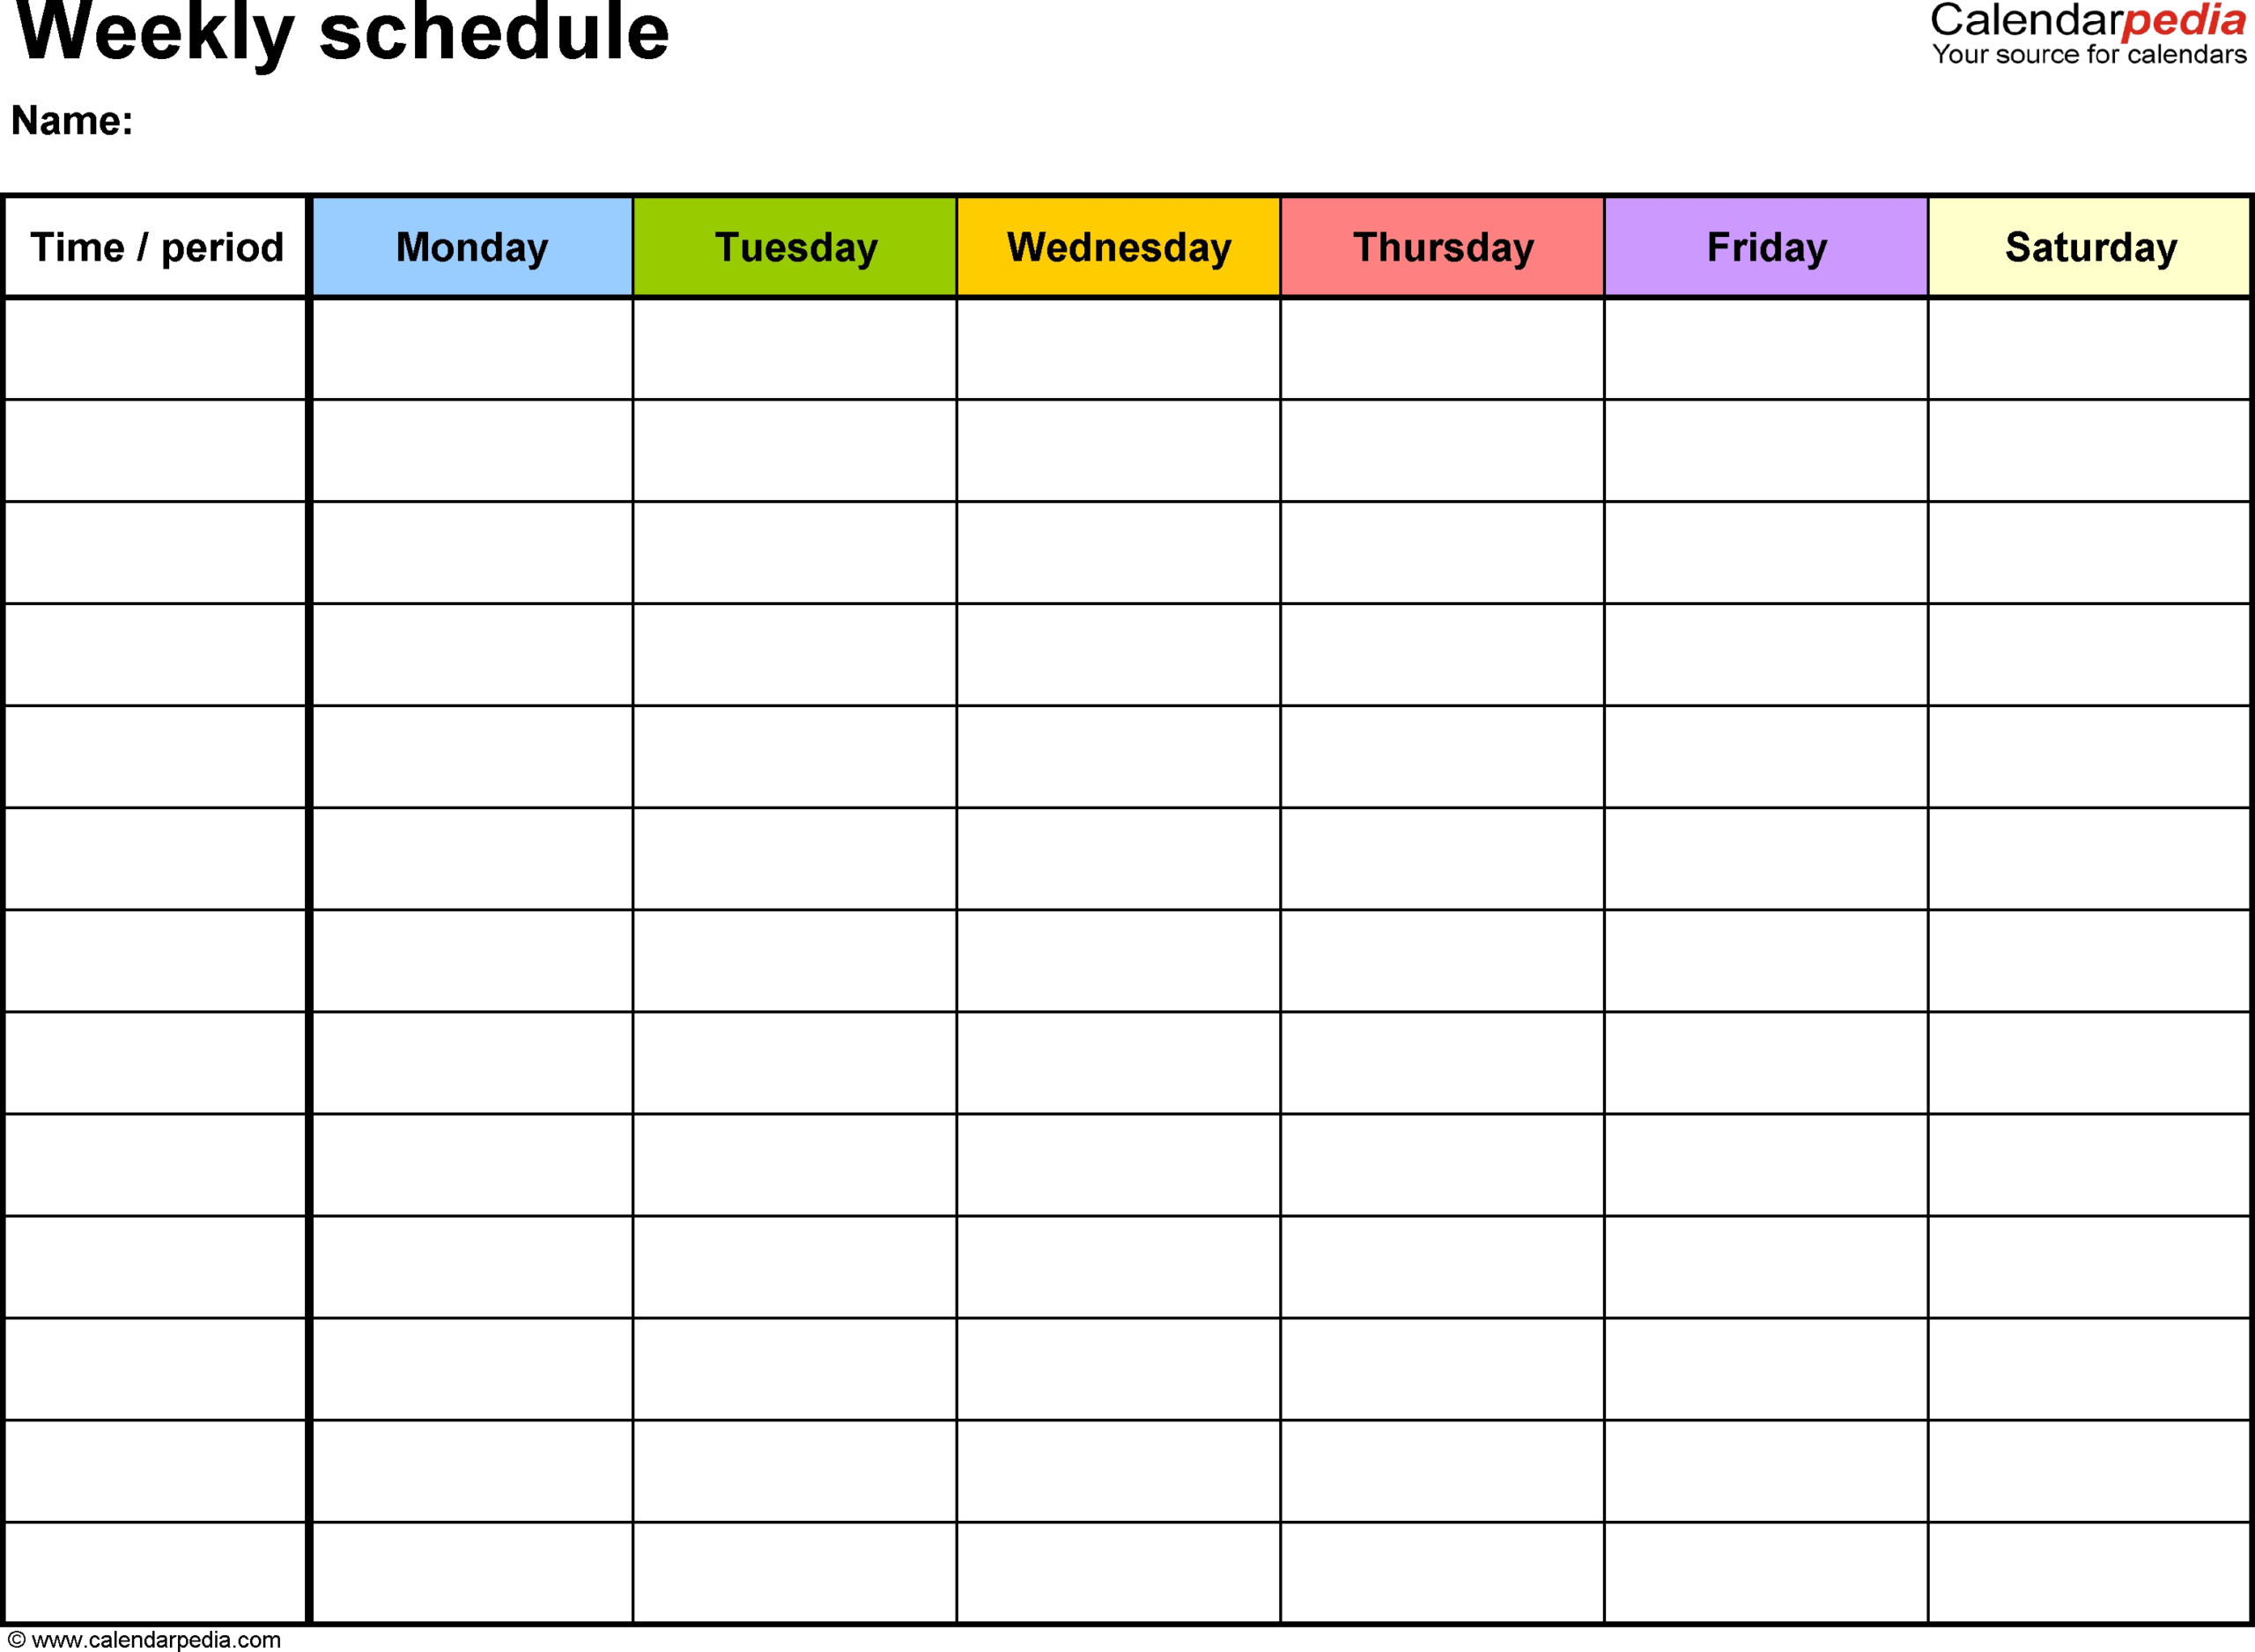 Blank Time Slot Week Schedules | Calendar Template Printable for Week Calendar With Time Slots